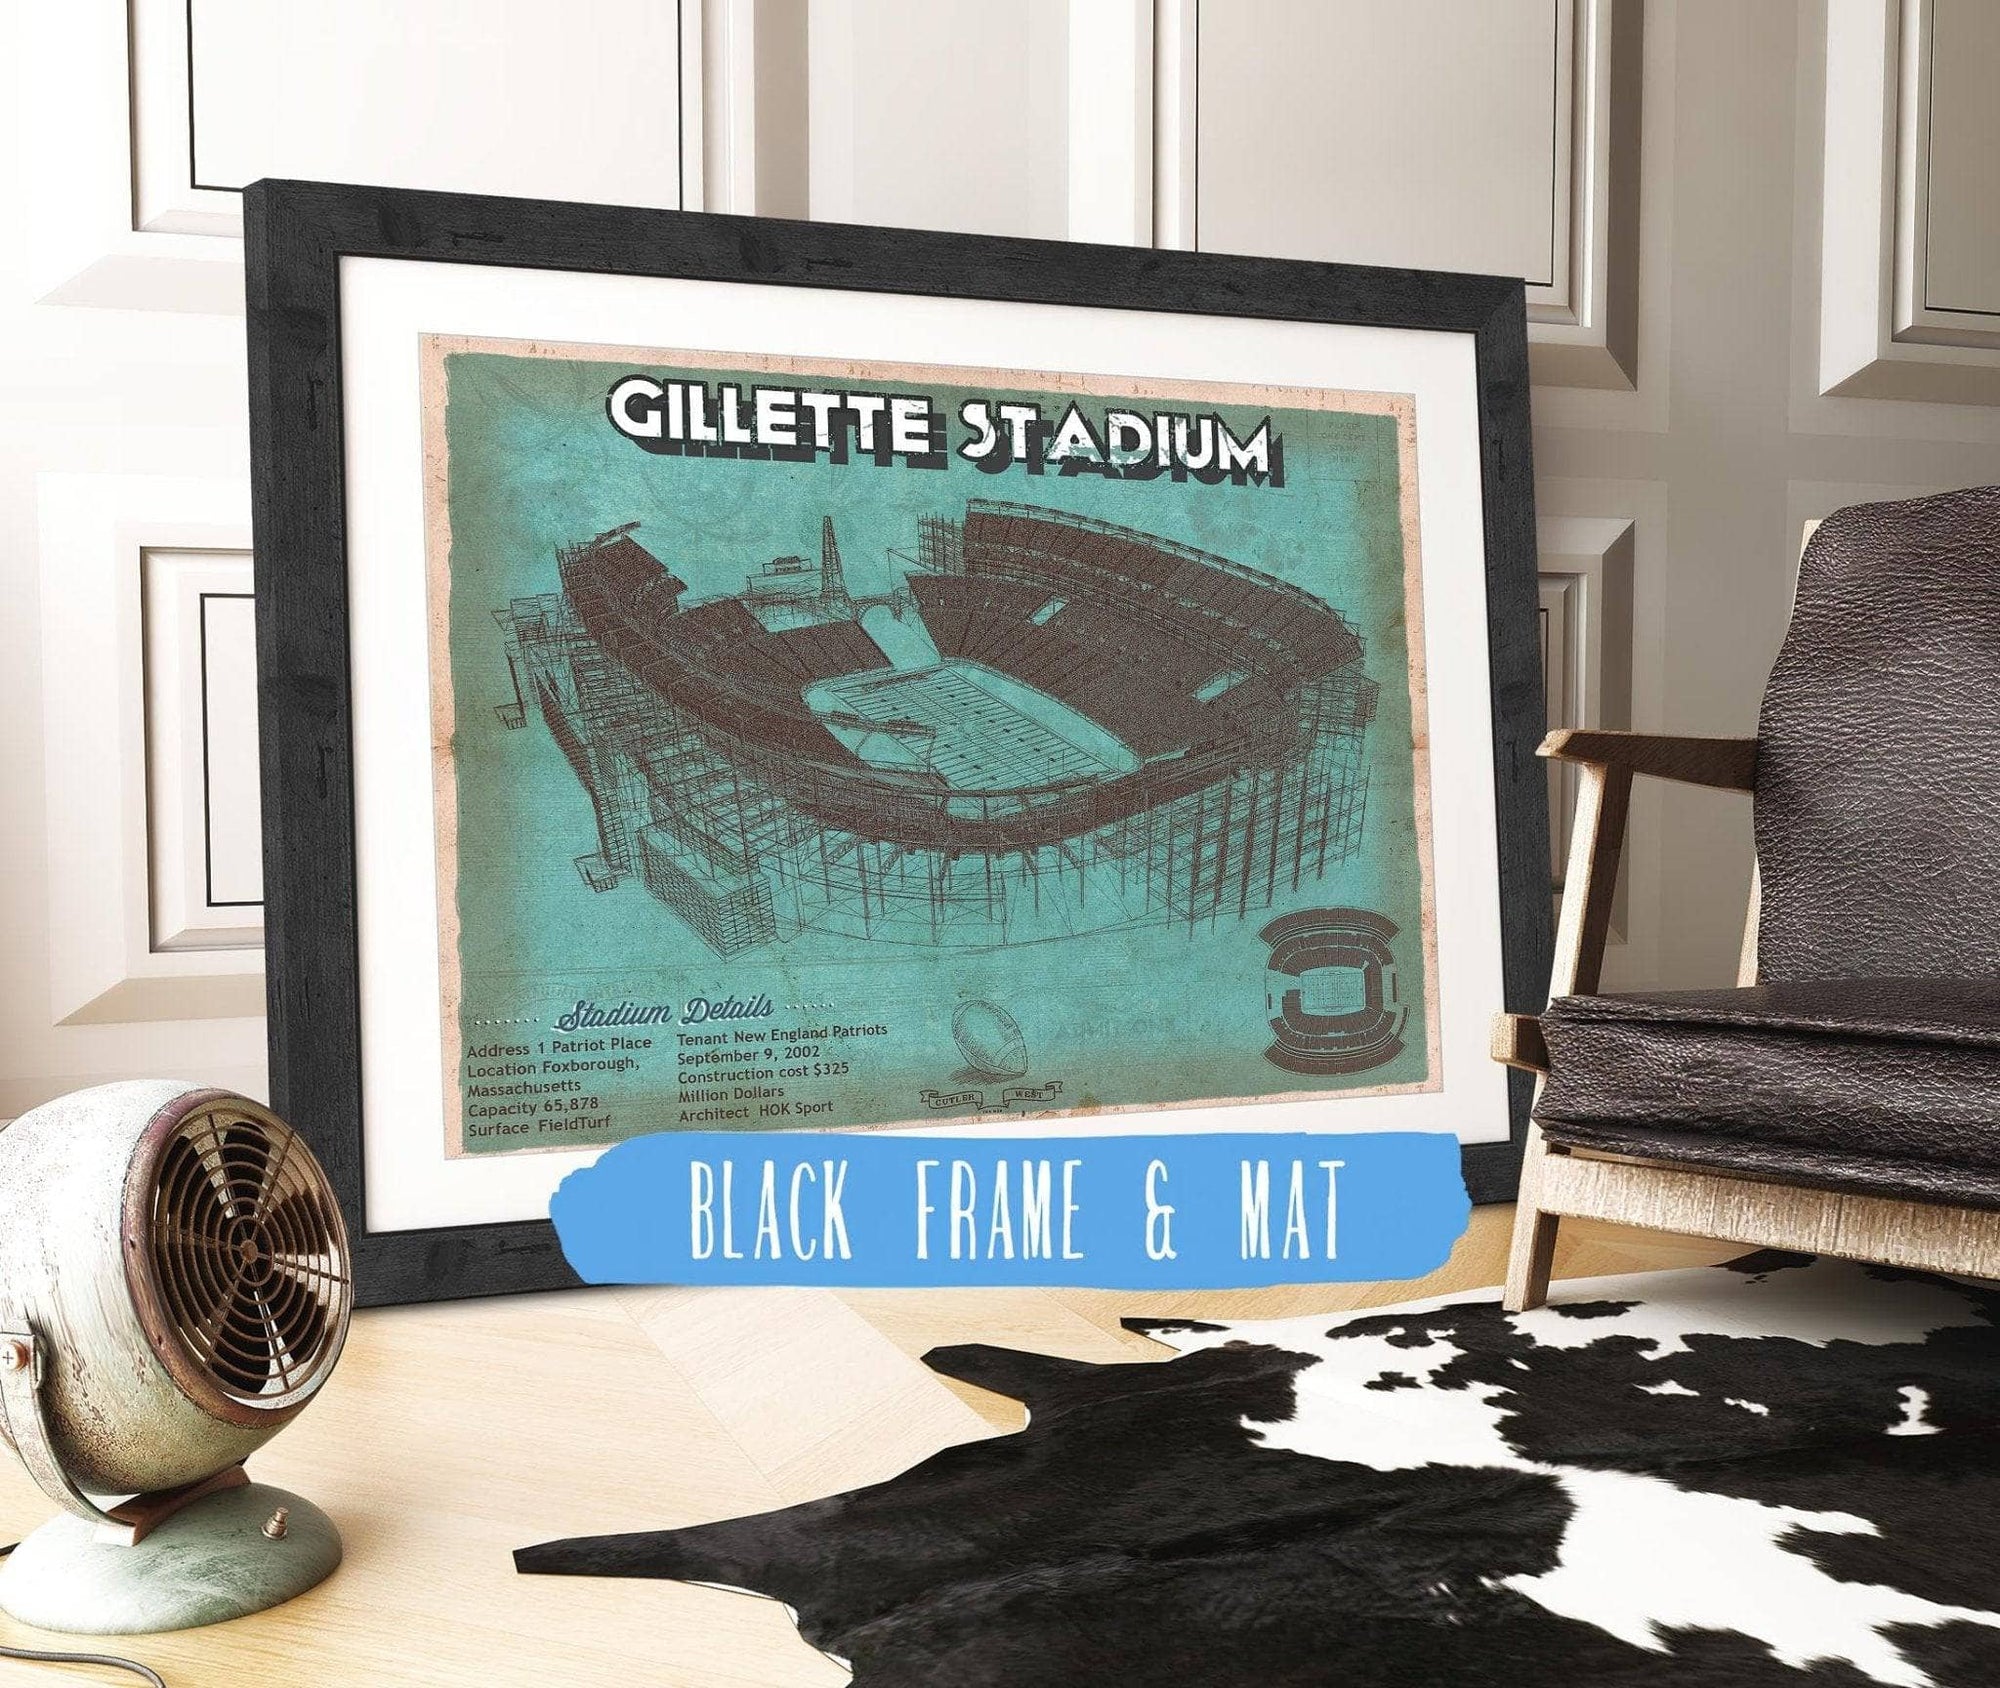 Cutler West Pro Football Collection 14" x 11" / Black Frame & Mat New England Patriots Gillette Stadium Seating Chart - Vintage Football Team Color Print 692087079_63456